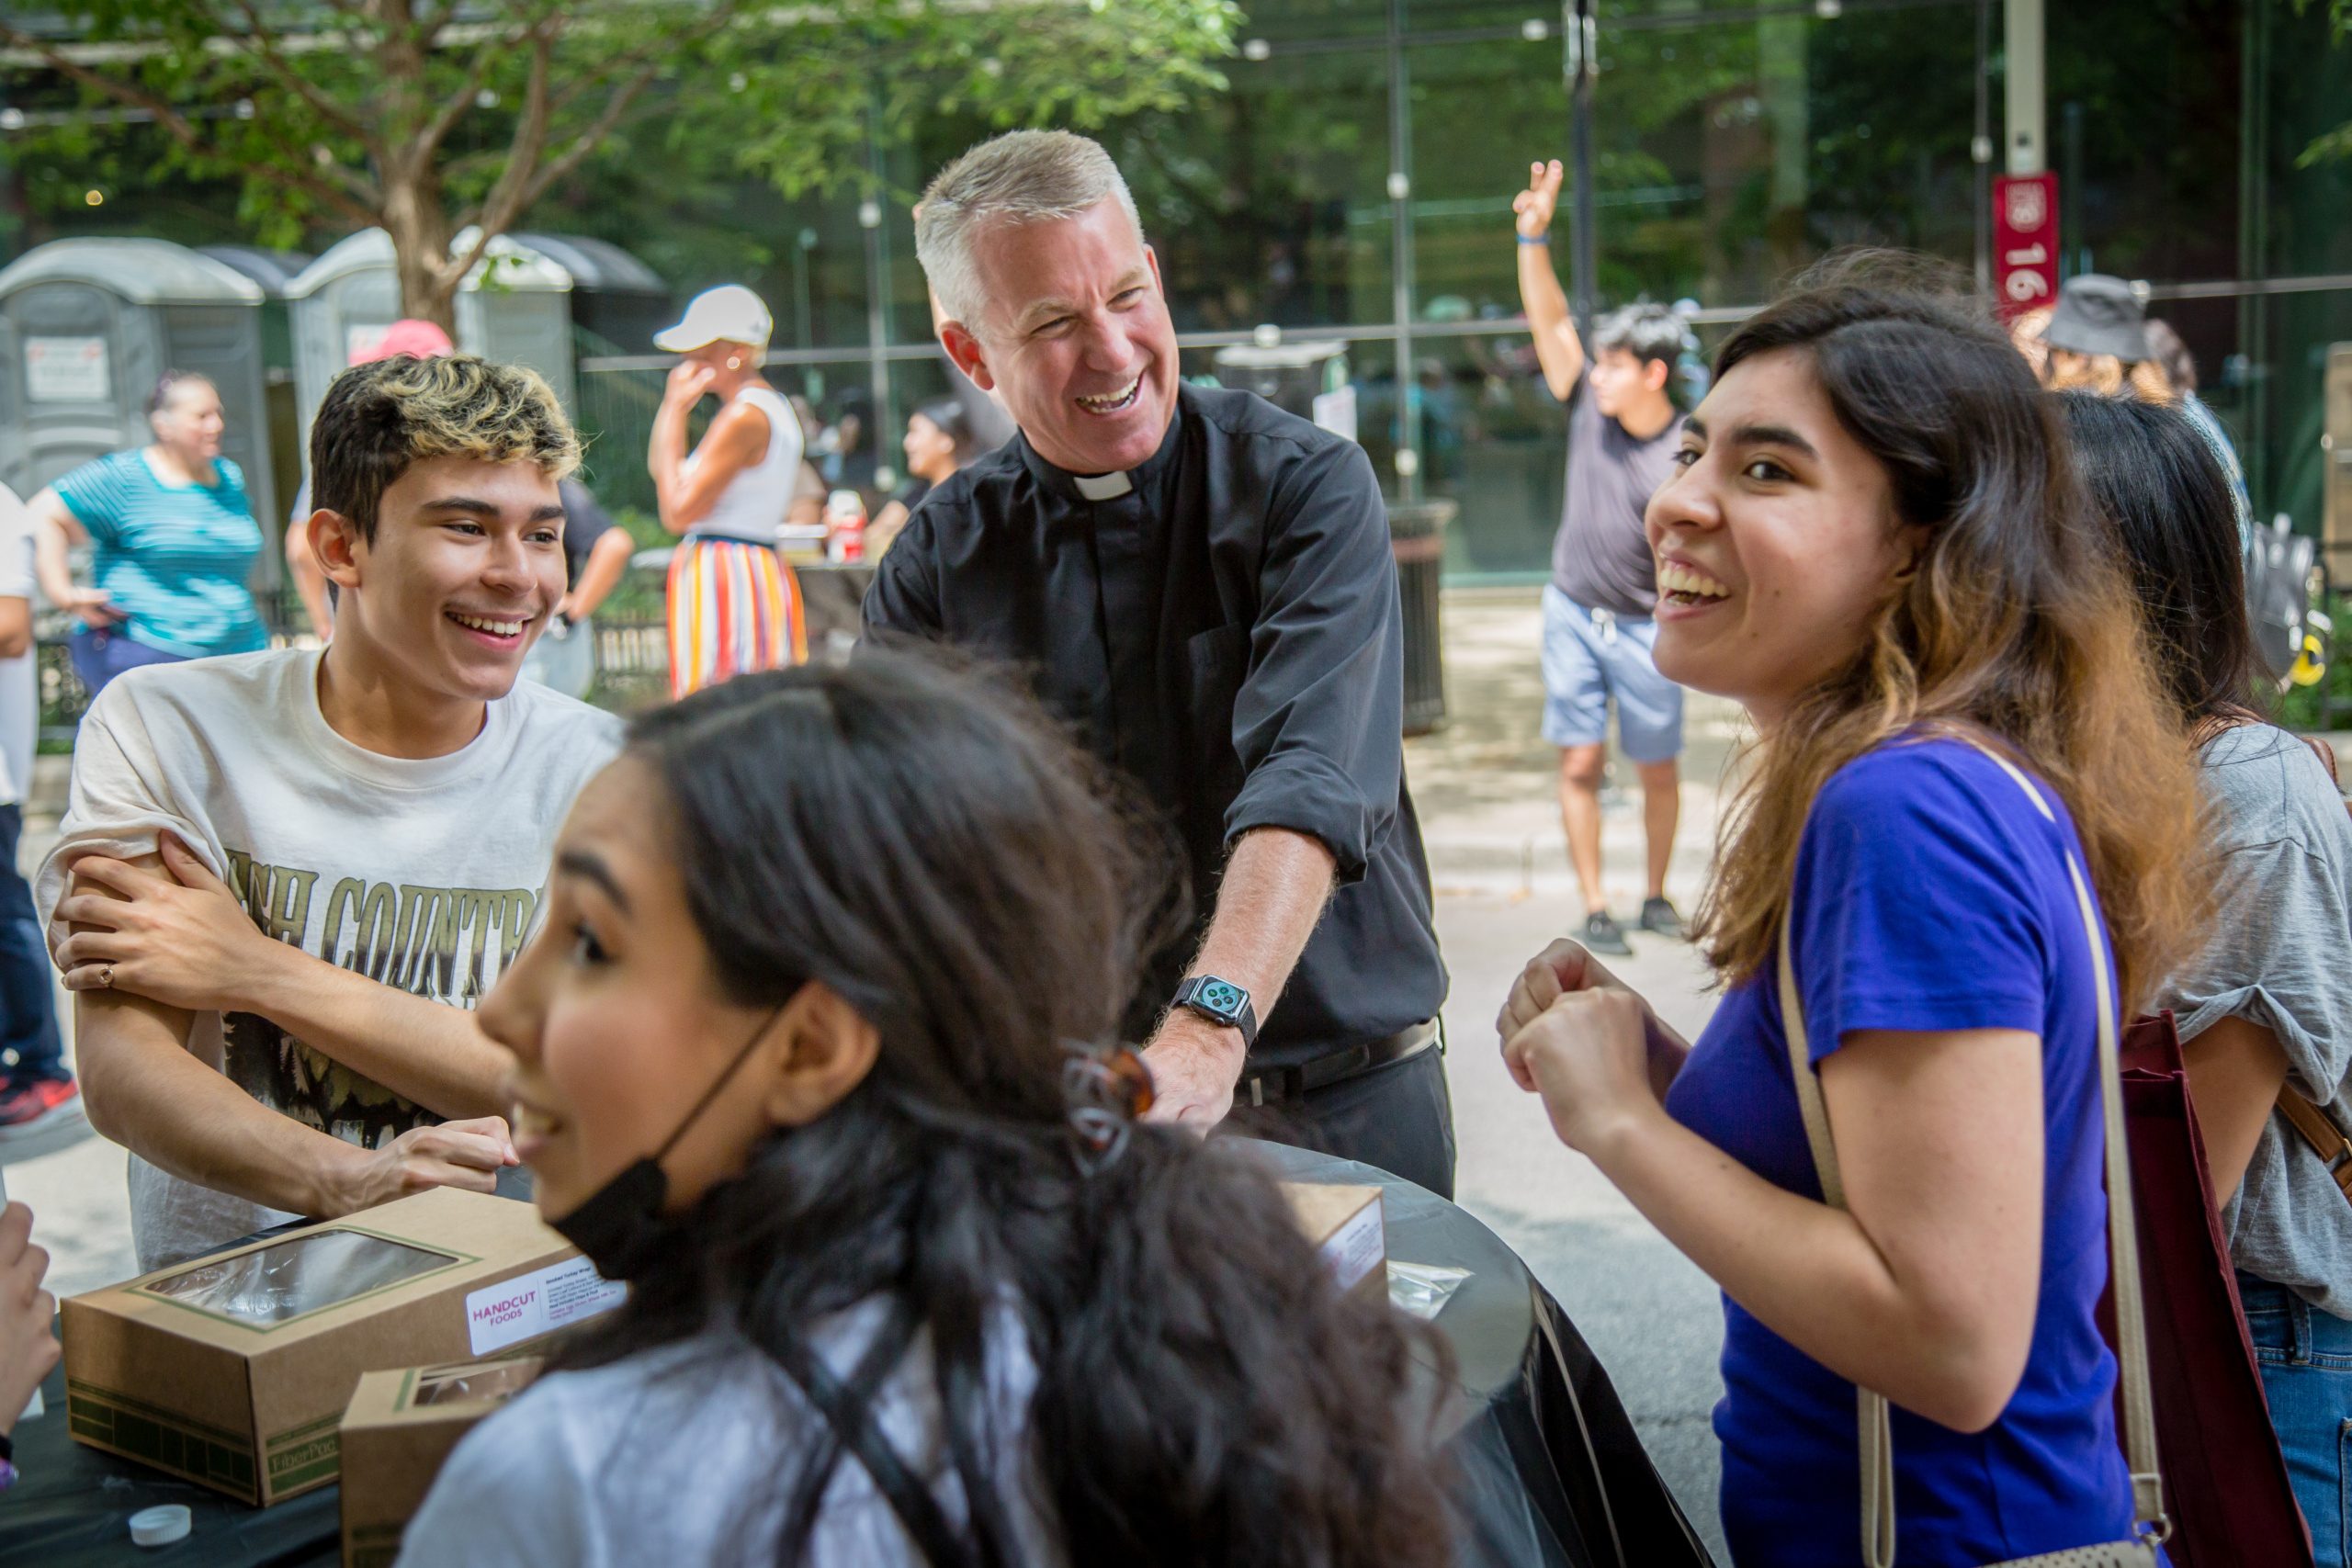 Students, staff and faculty enjoy summer fun and food while at the Arrupe College Meet and Greet Block Party on Pearson Street, July 14, 2021.The event celebrated incoming freshmen and outgoing sophomores. (Photo: Natalie Battaglia)